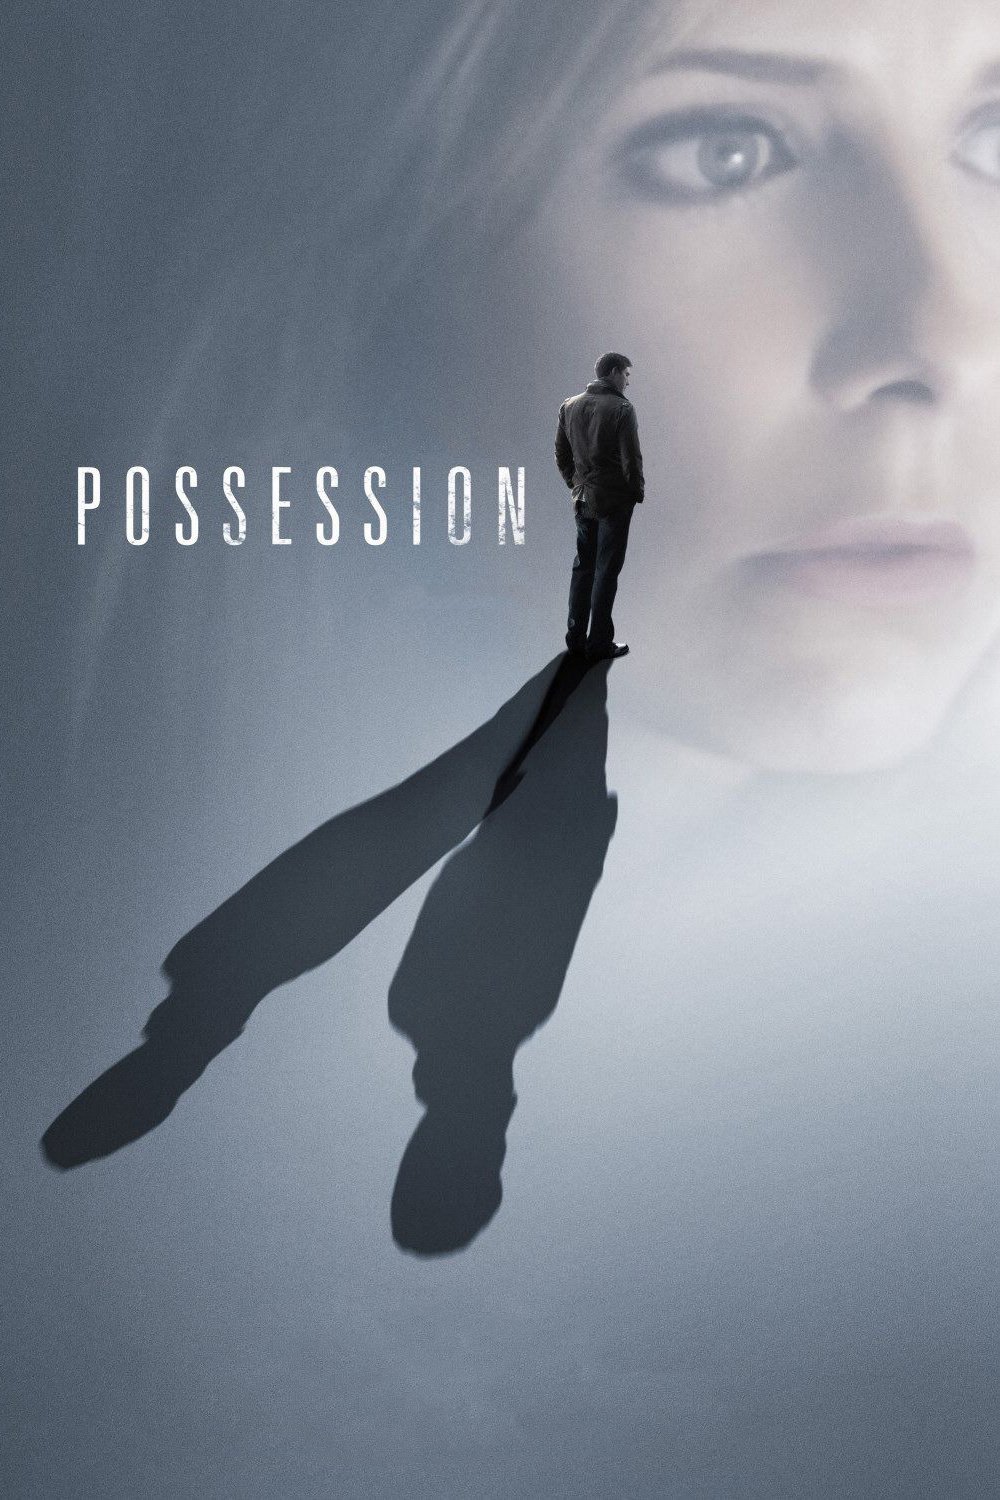 Poster for the movie "Possession"